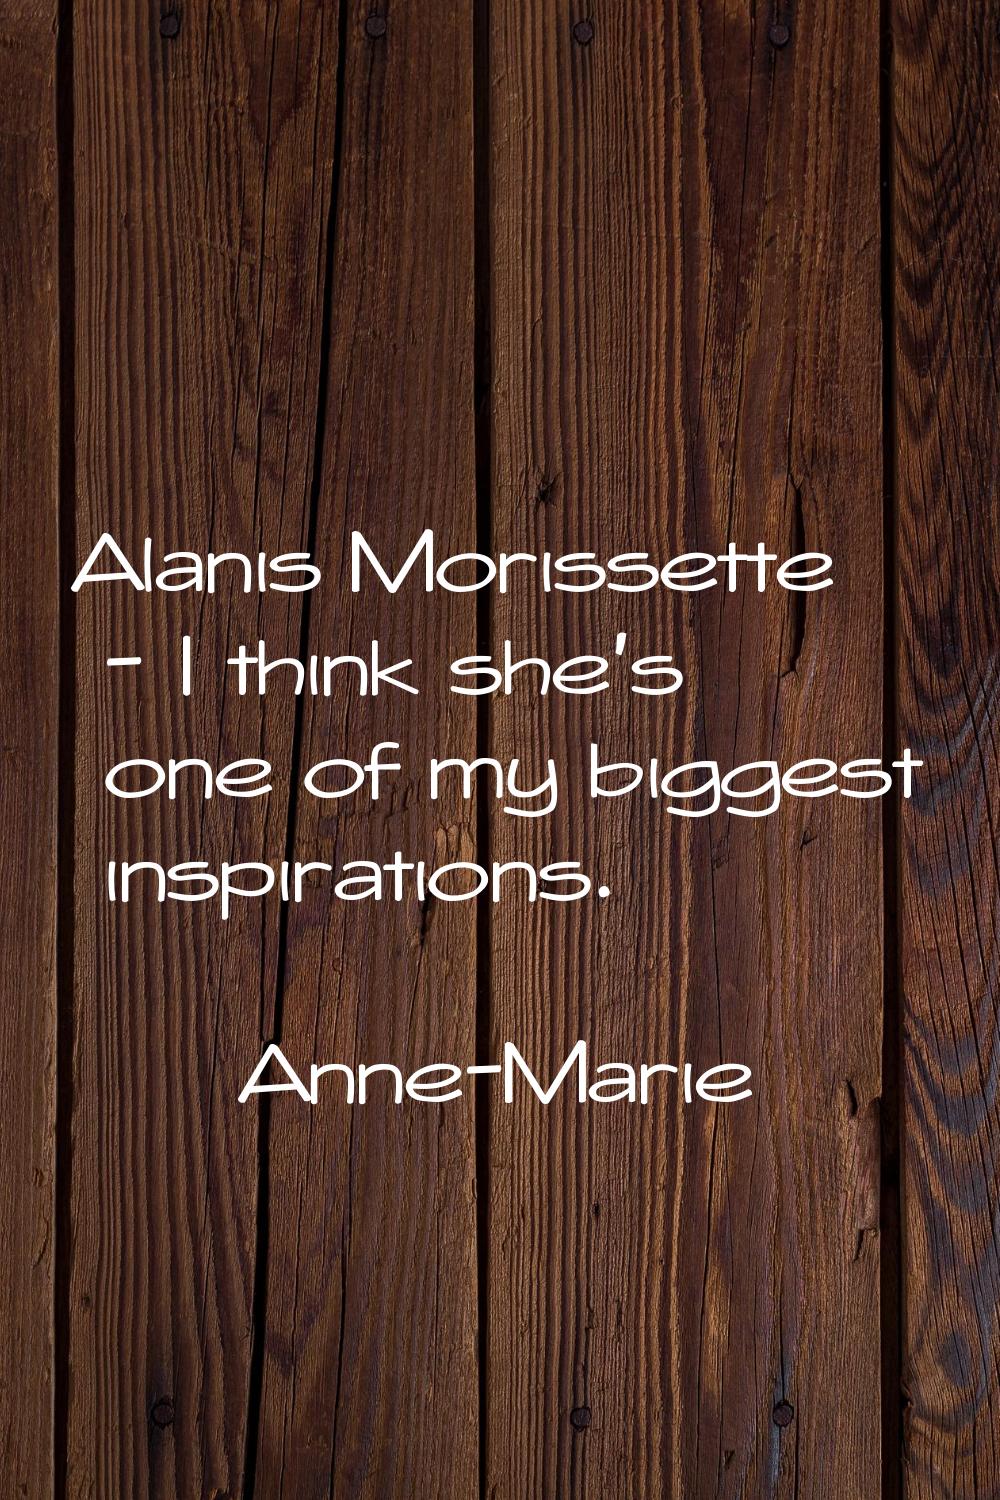 Alanis Morissette - I think she's one of my biggest inspirations.